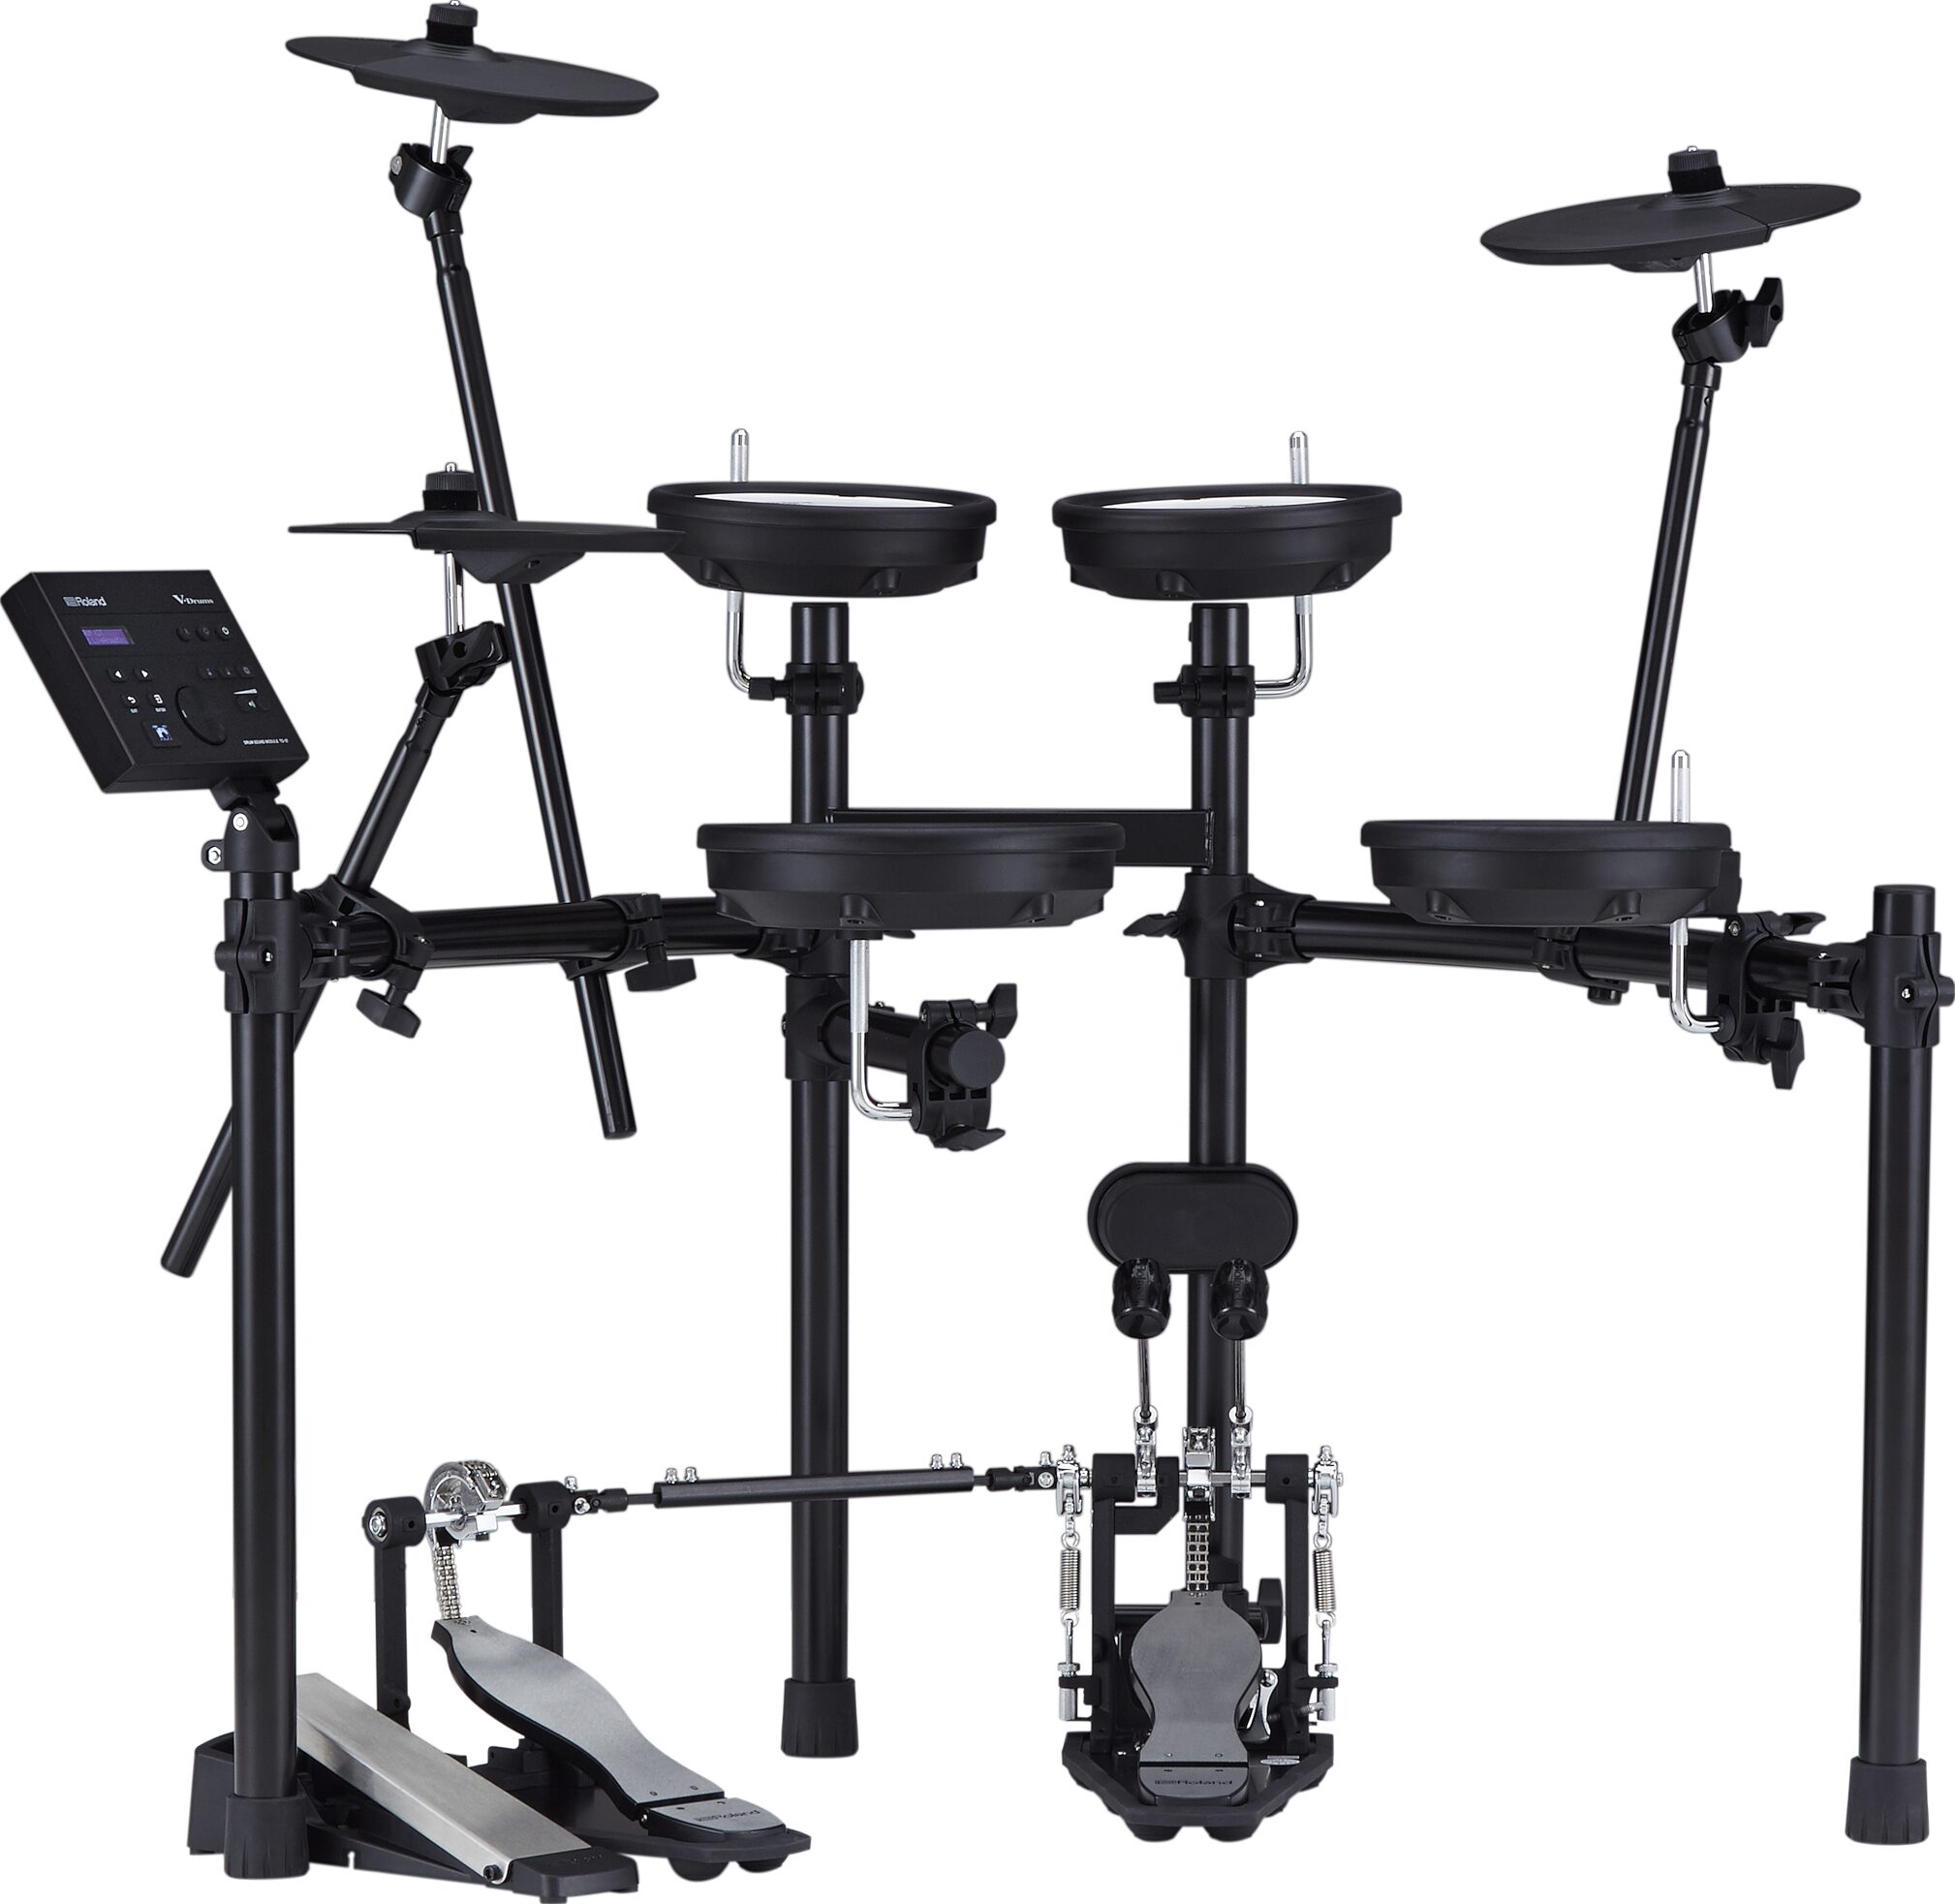 Roland TD-07DMK V-Drums Electronic Drum Kit | zZounds